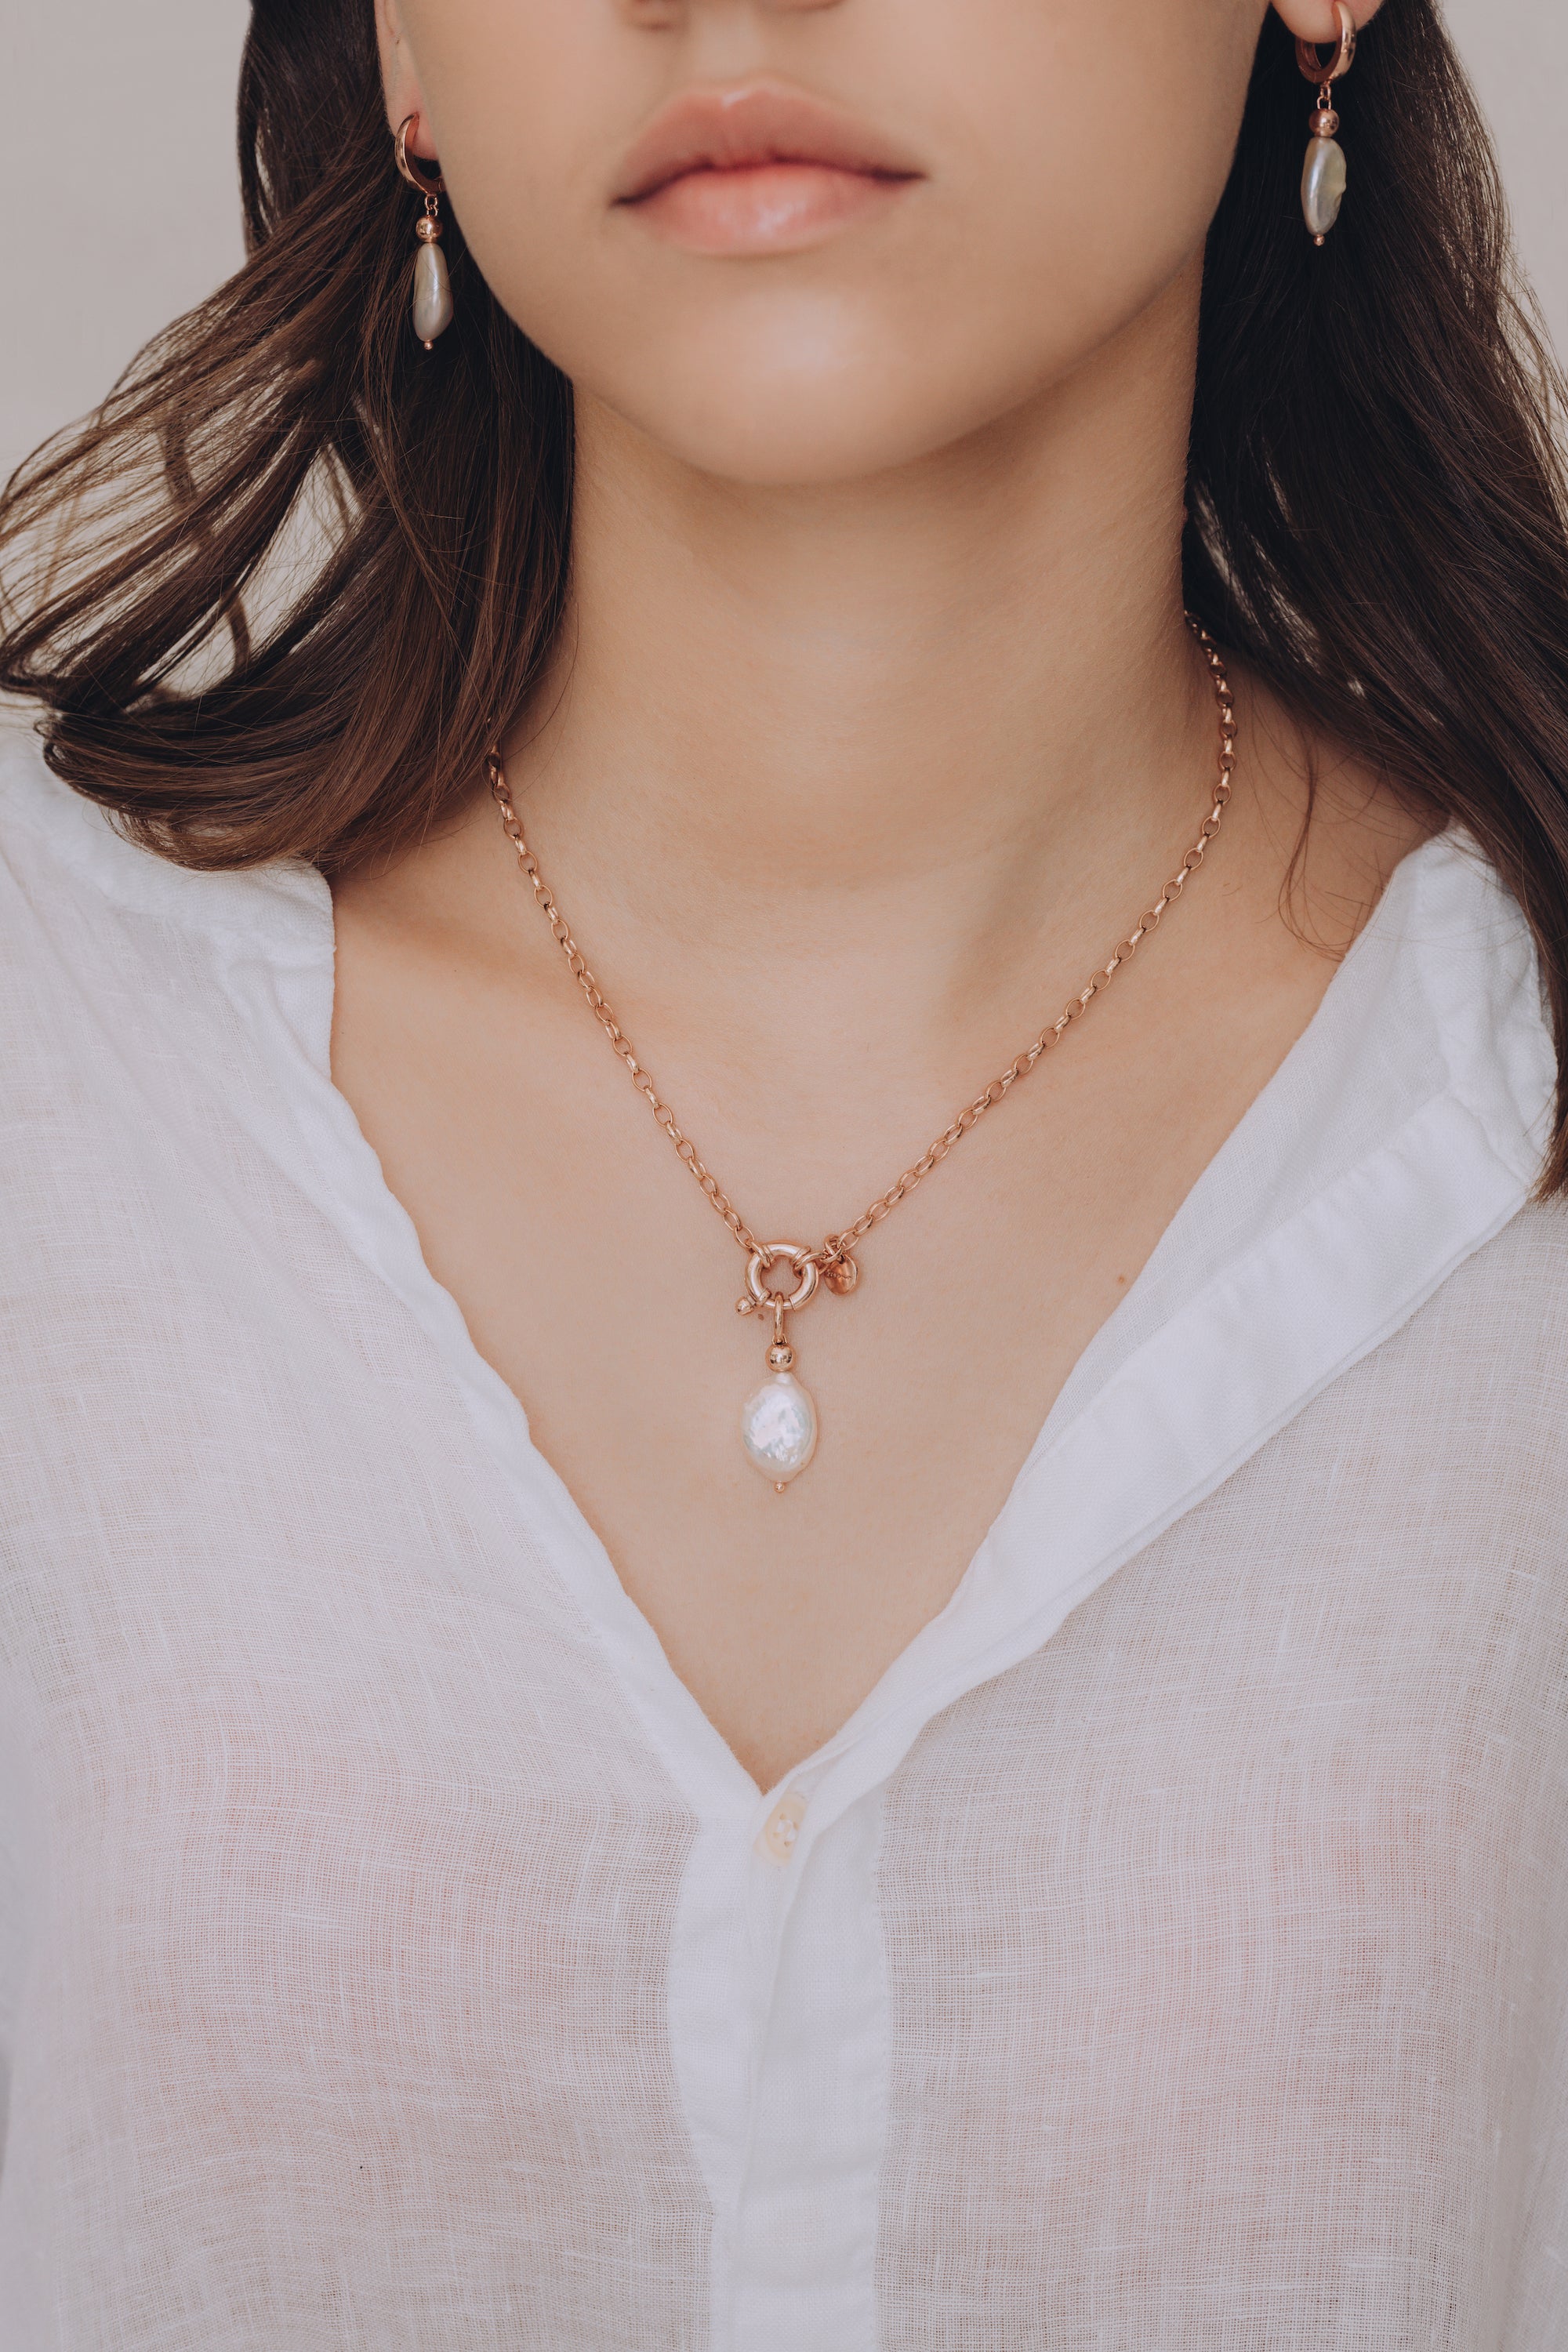 Discover Your Perfect Everyday Pearls With Bois Cheri - Oceano Pearls